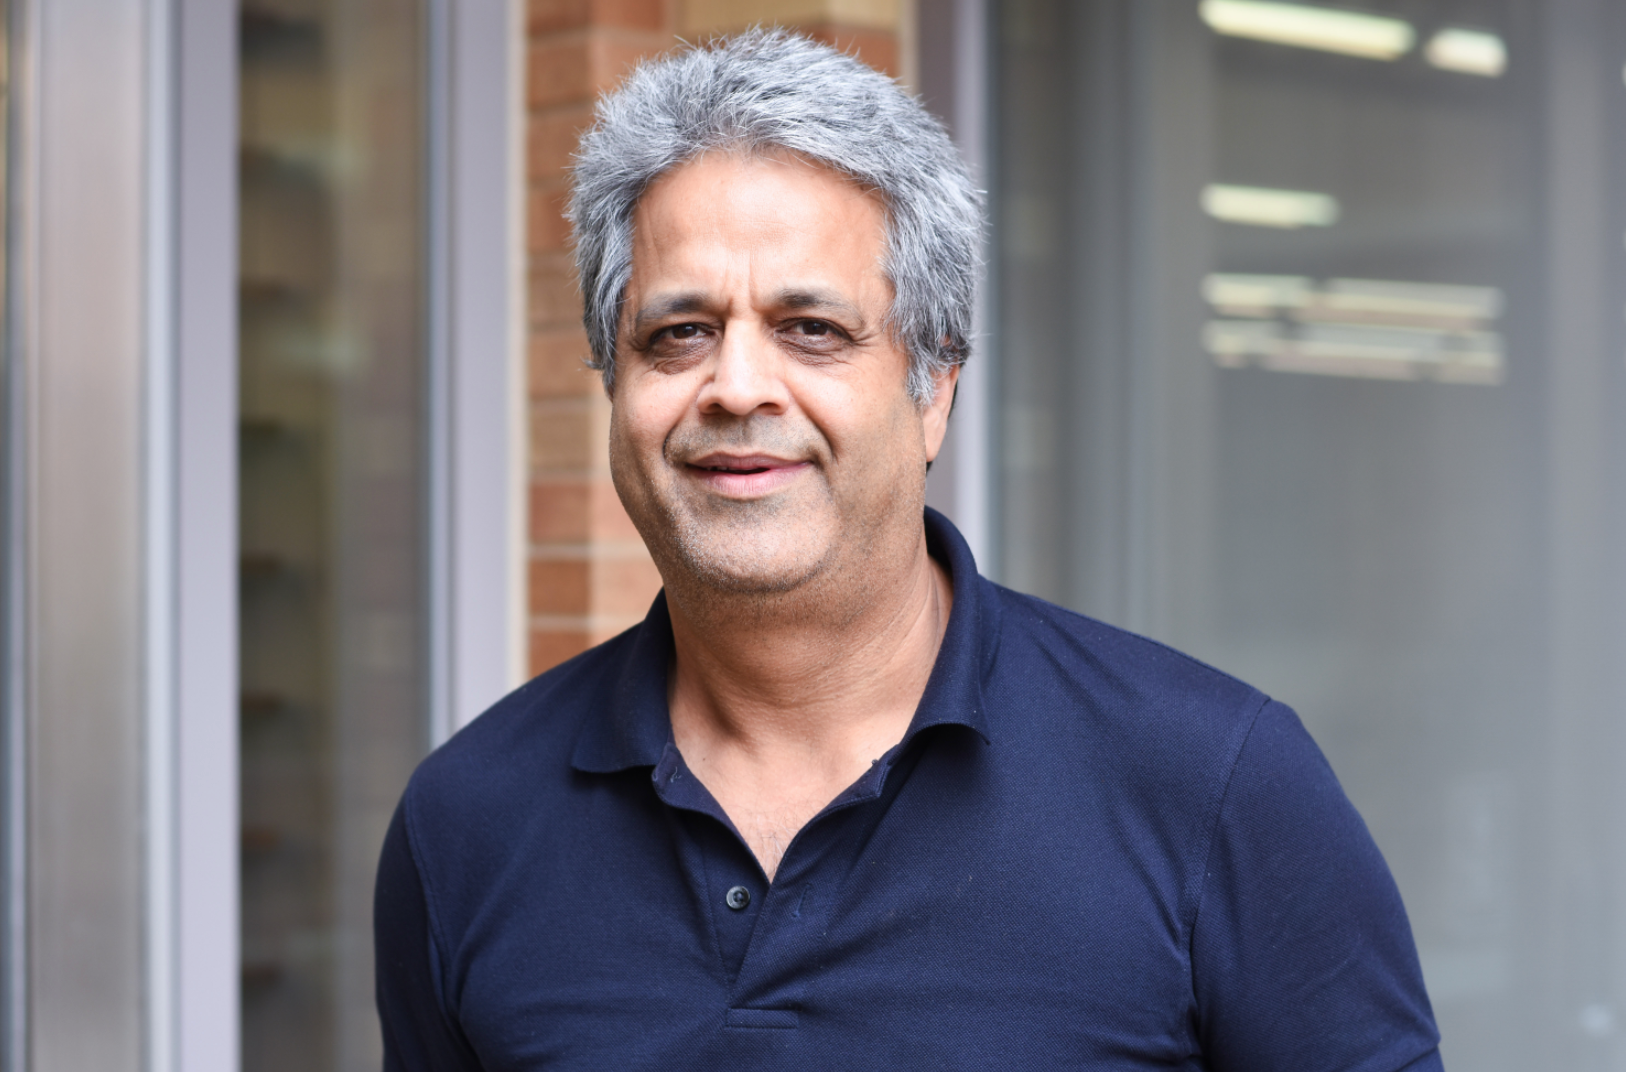 Director of the Center for Big Data Analytics at the Oden Institute, Inderjit Dhillon, has been named a fellow of the Association for the Advancement of Artificial Intelligence.